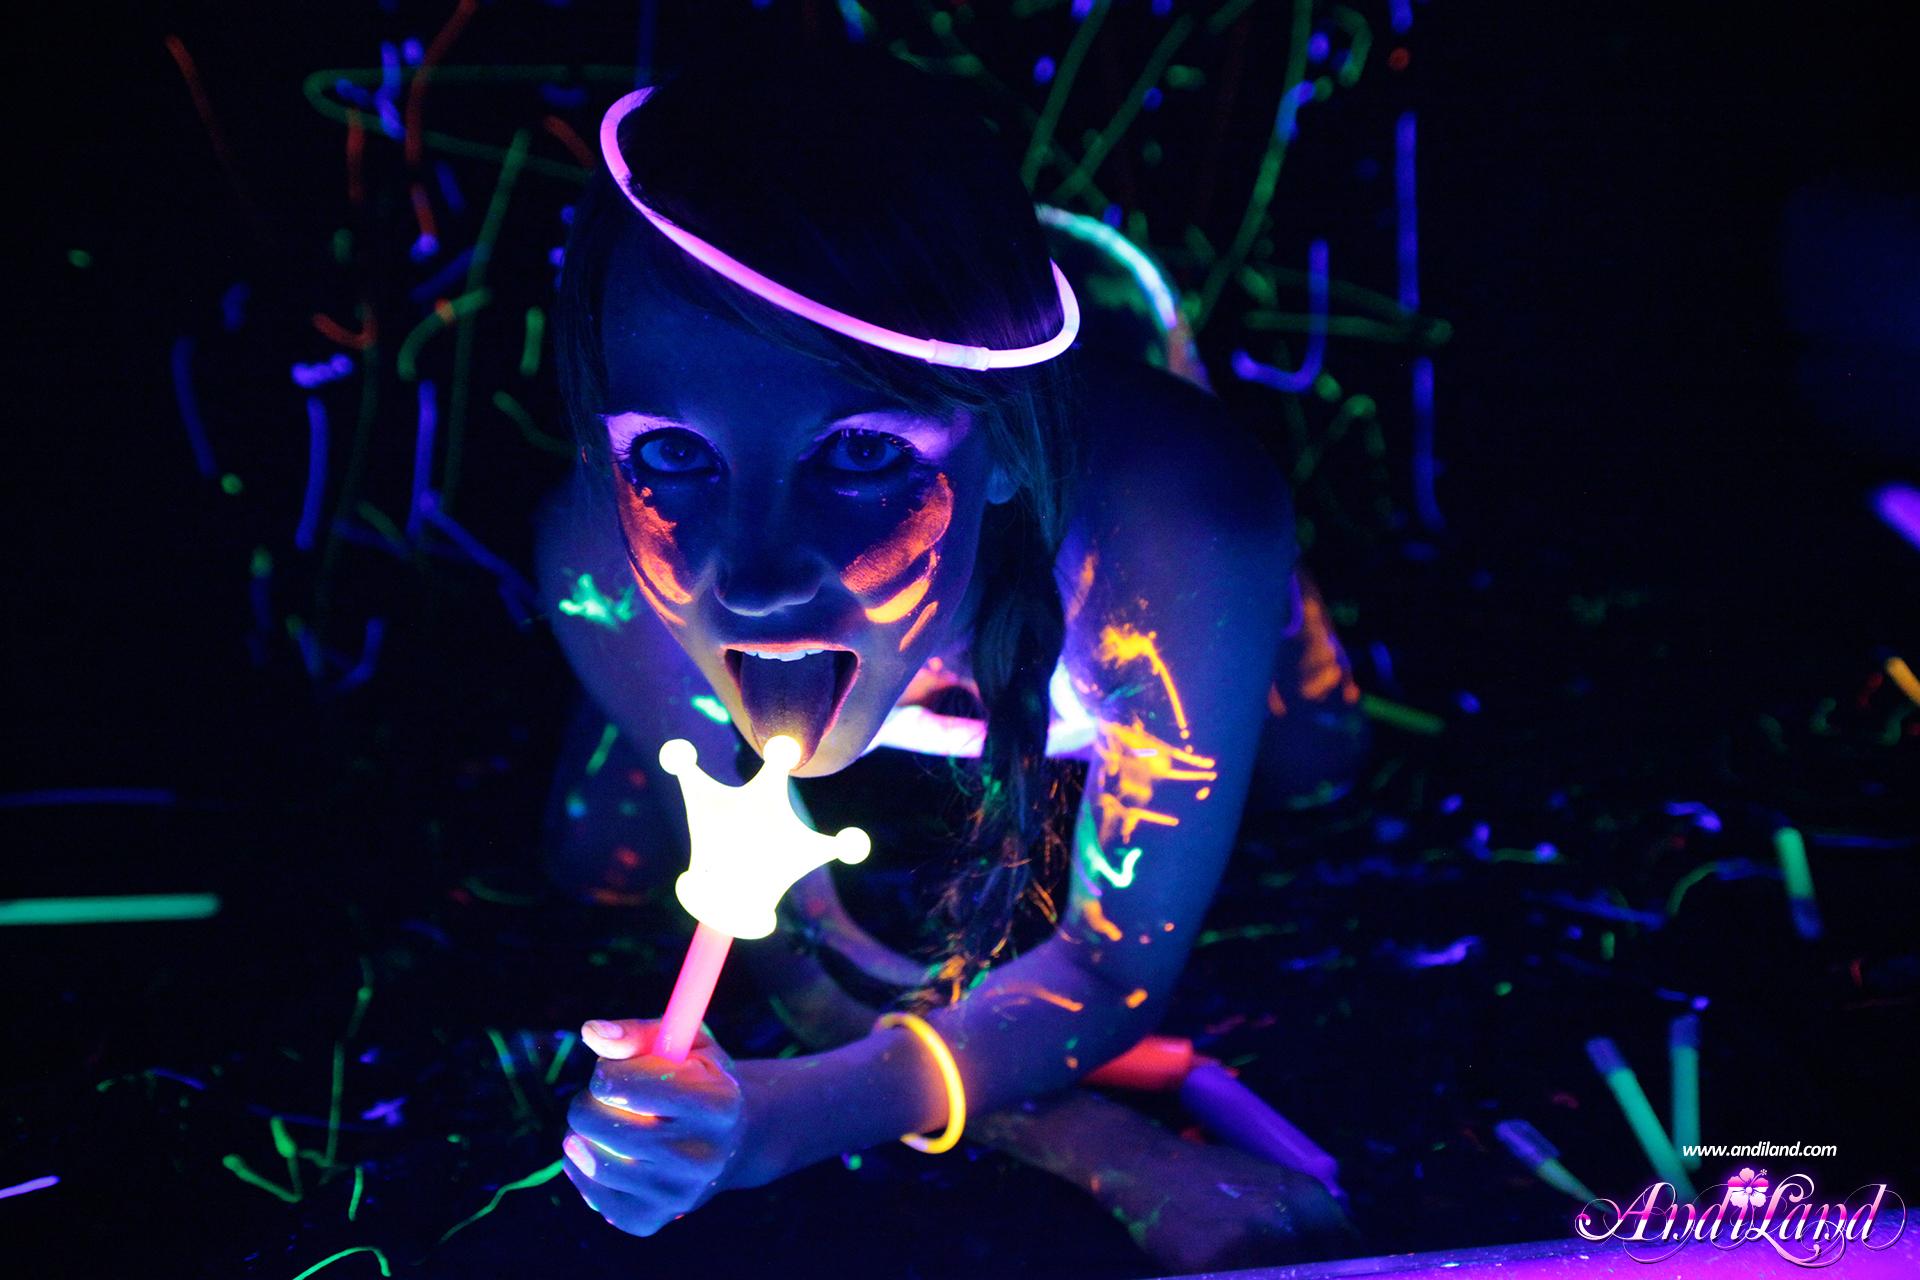 Andi Land gets super kinky with the black light and neon body paint #53134146